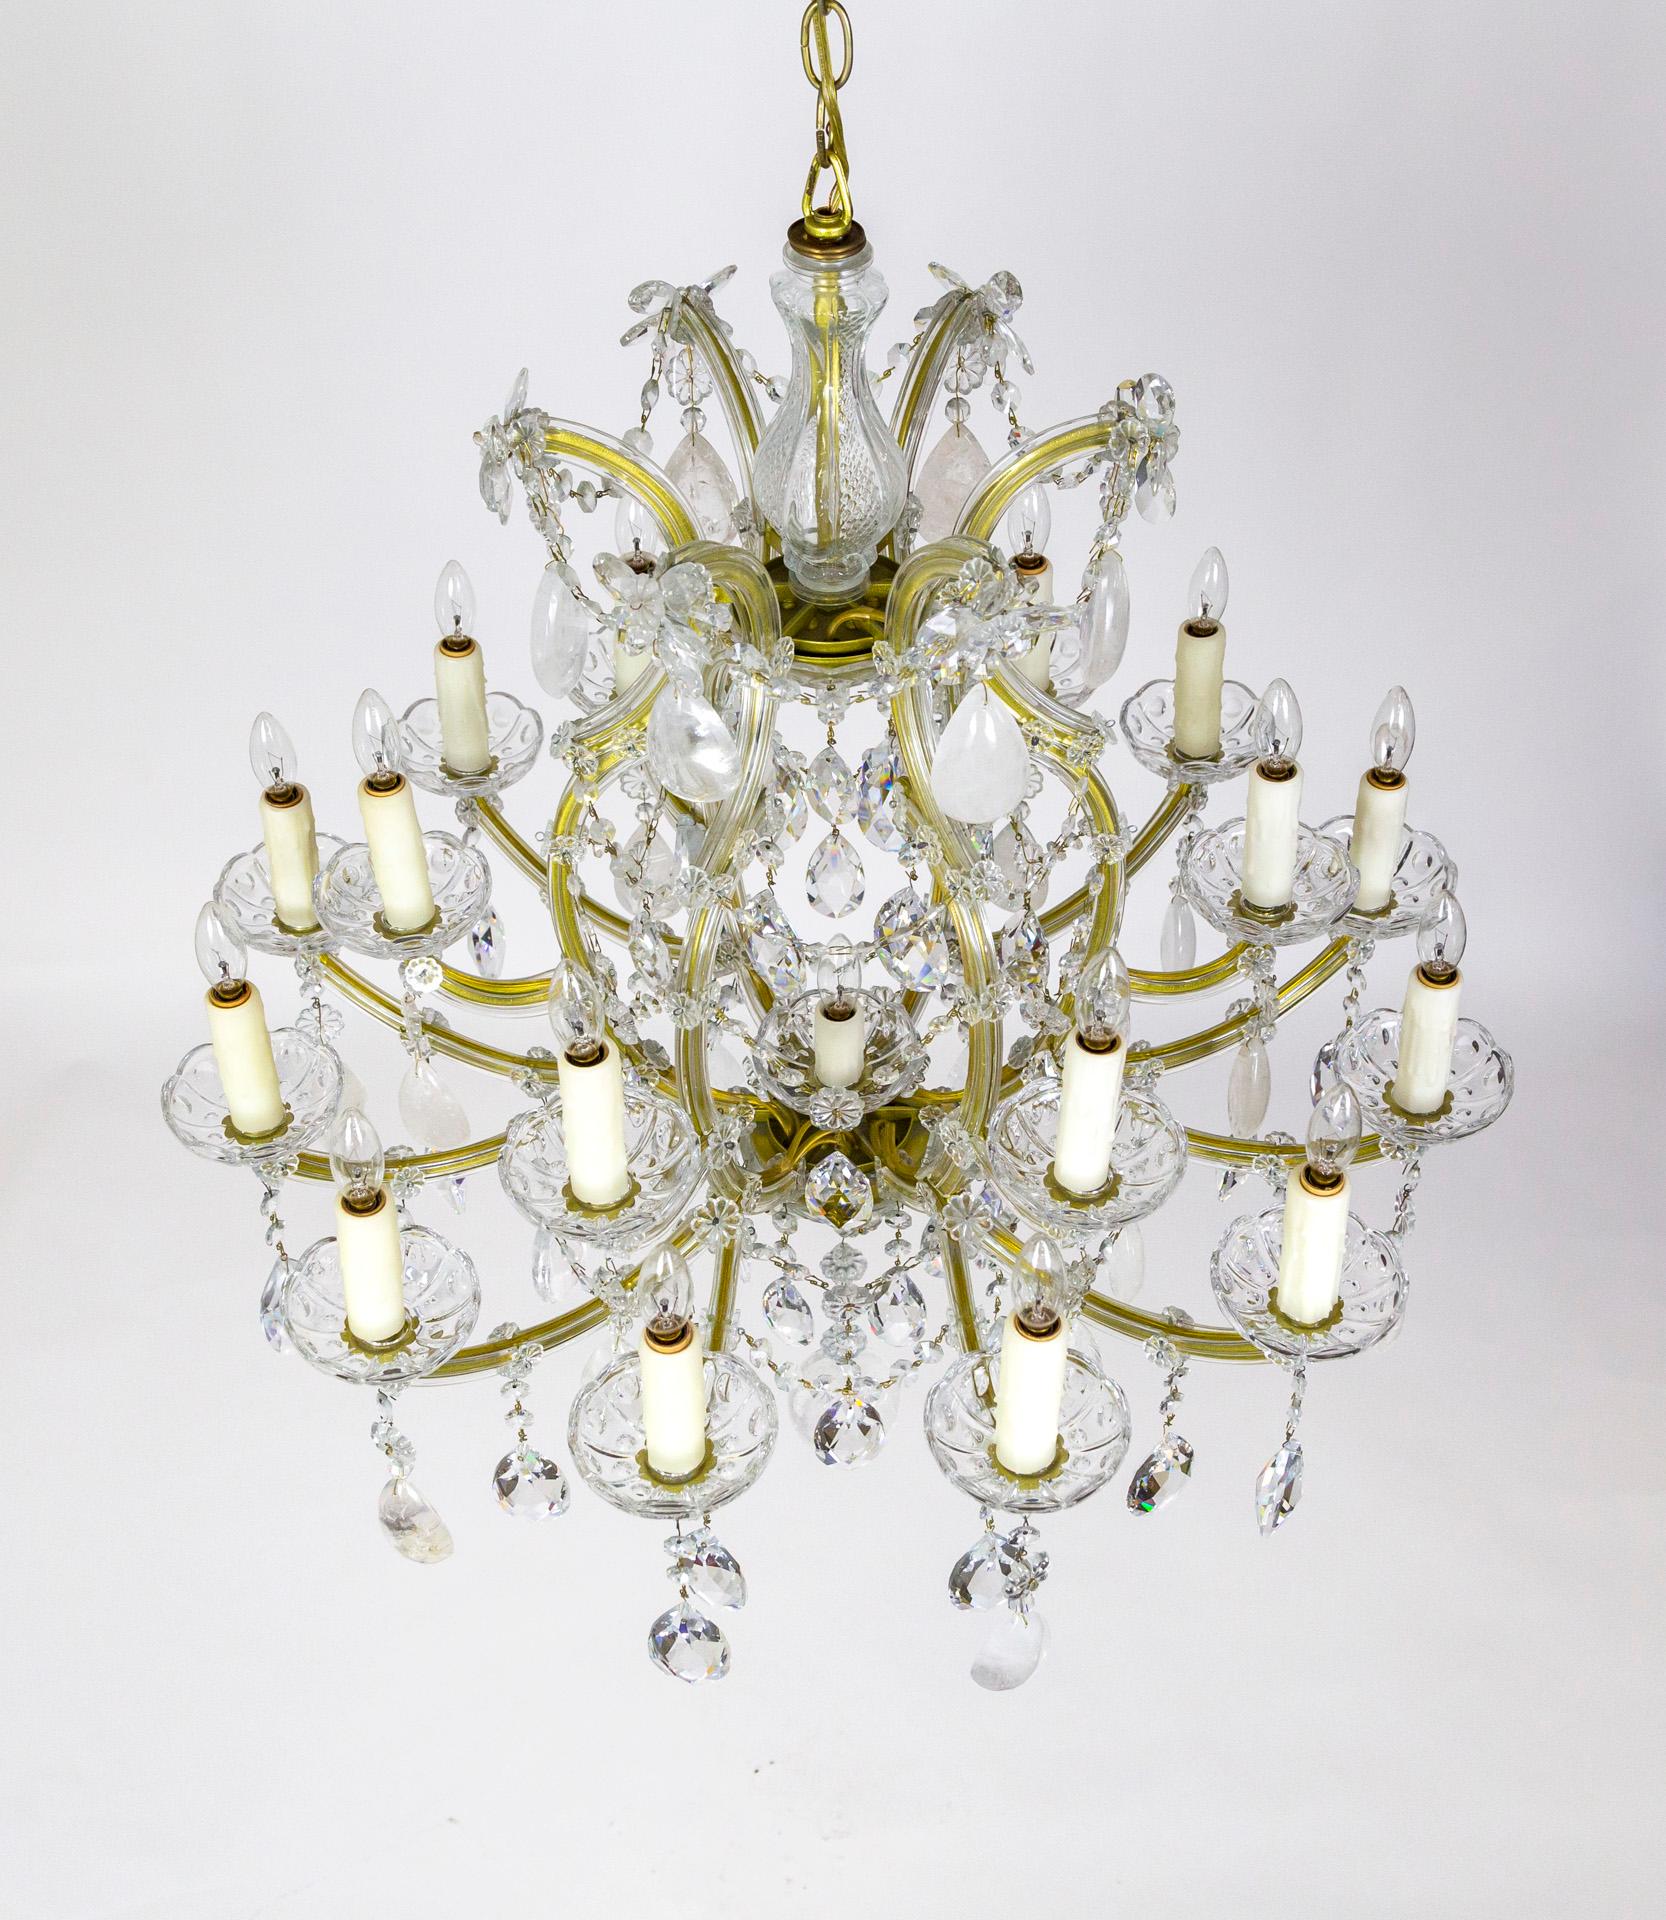 19-Light Rock Crystal Maria Theresa Chandelier In Good Condition For Sale In San Francisco, CA